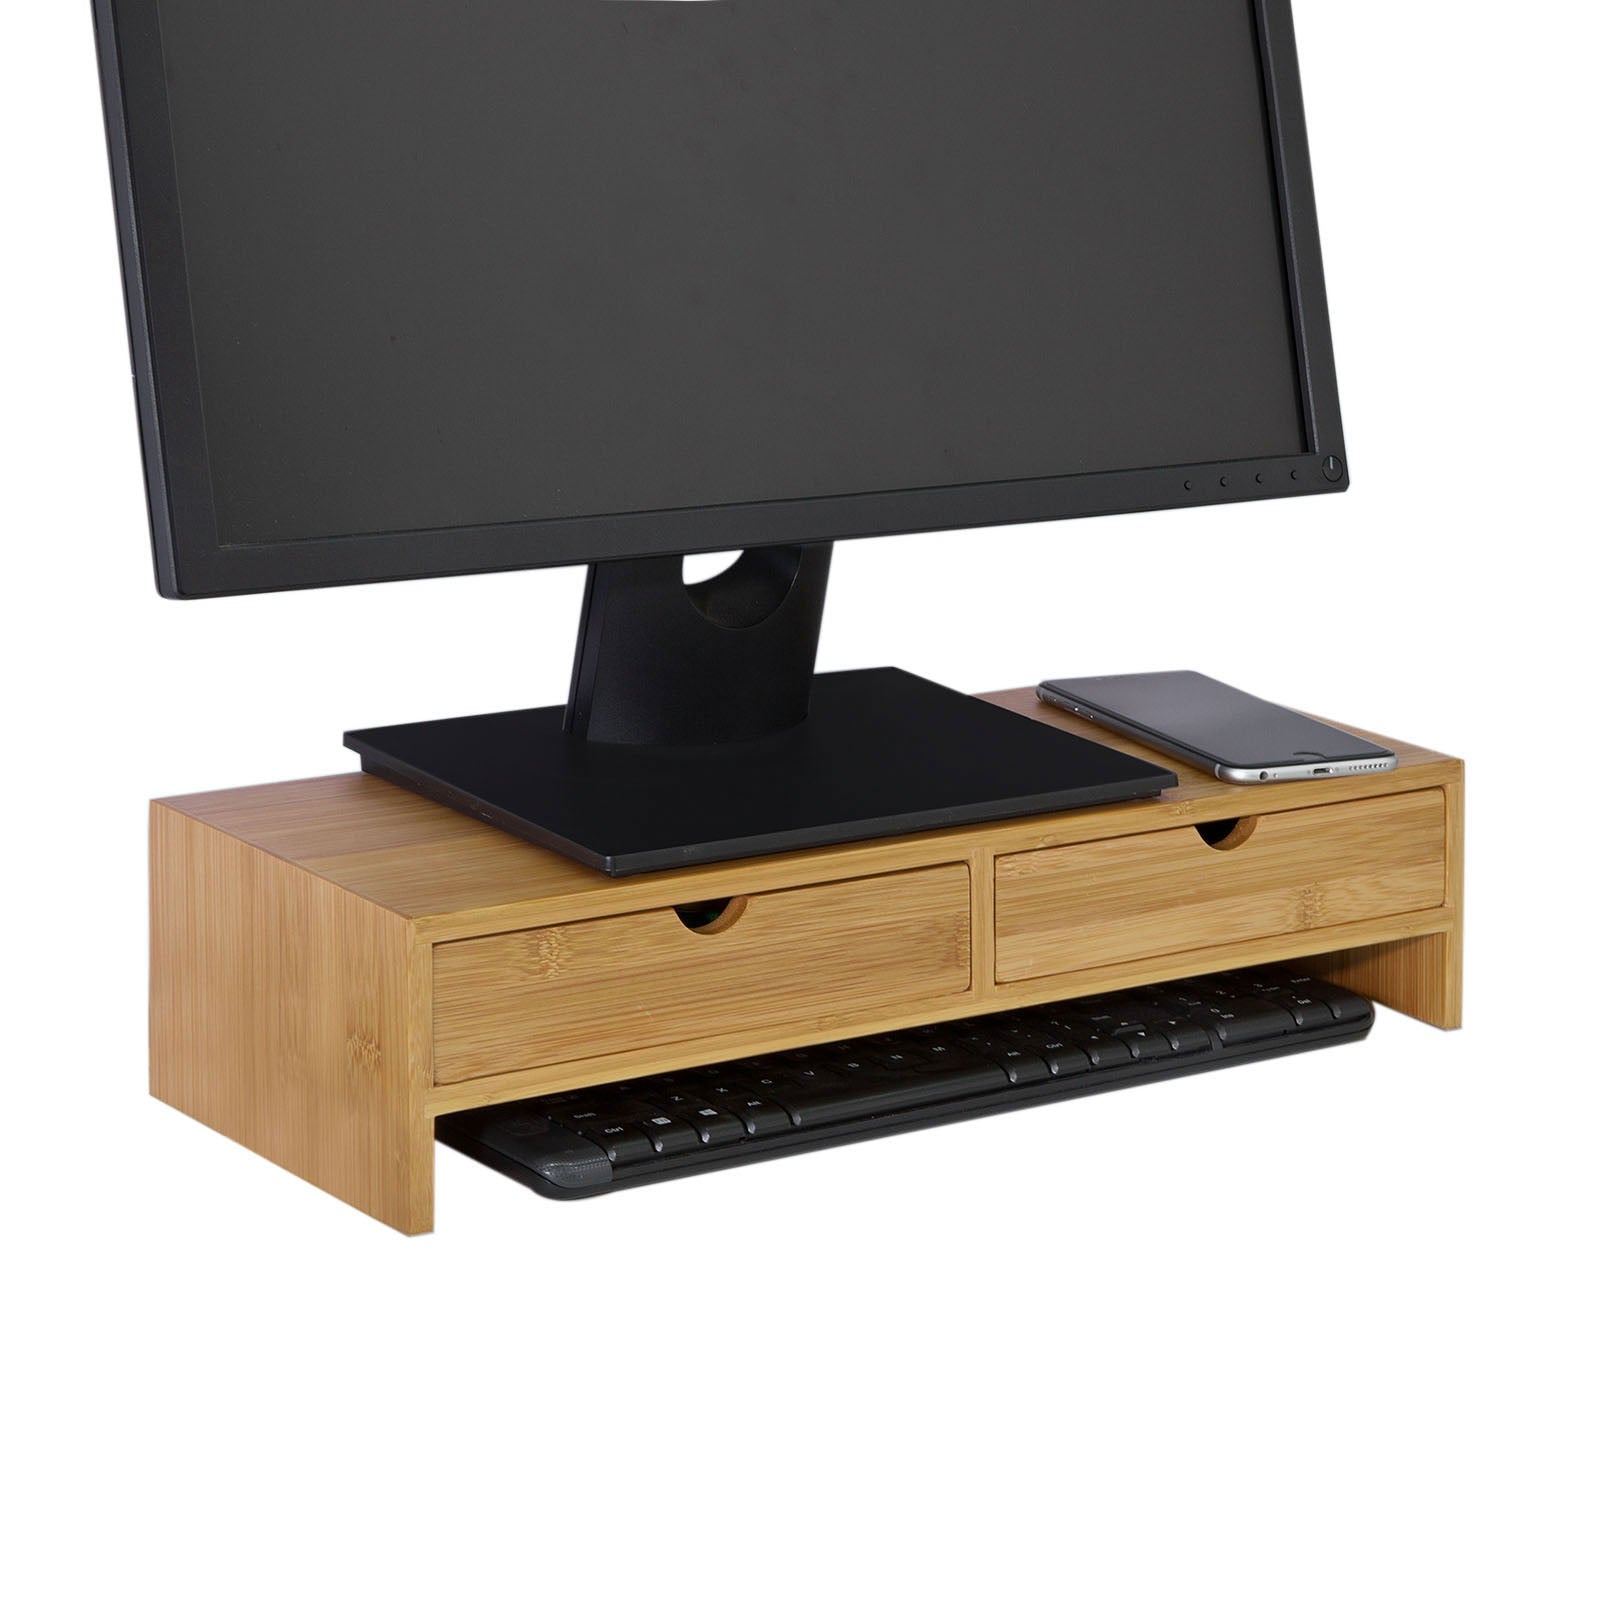 SoBuy Monitor Stand Computer Screen Stand Table,FRG198-N